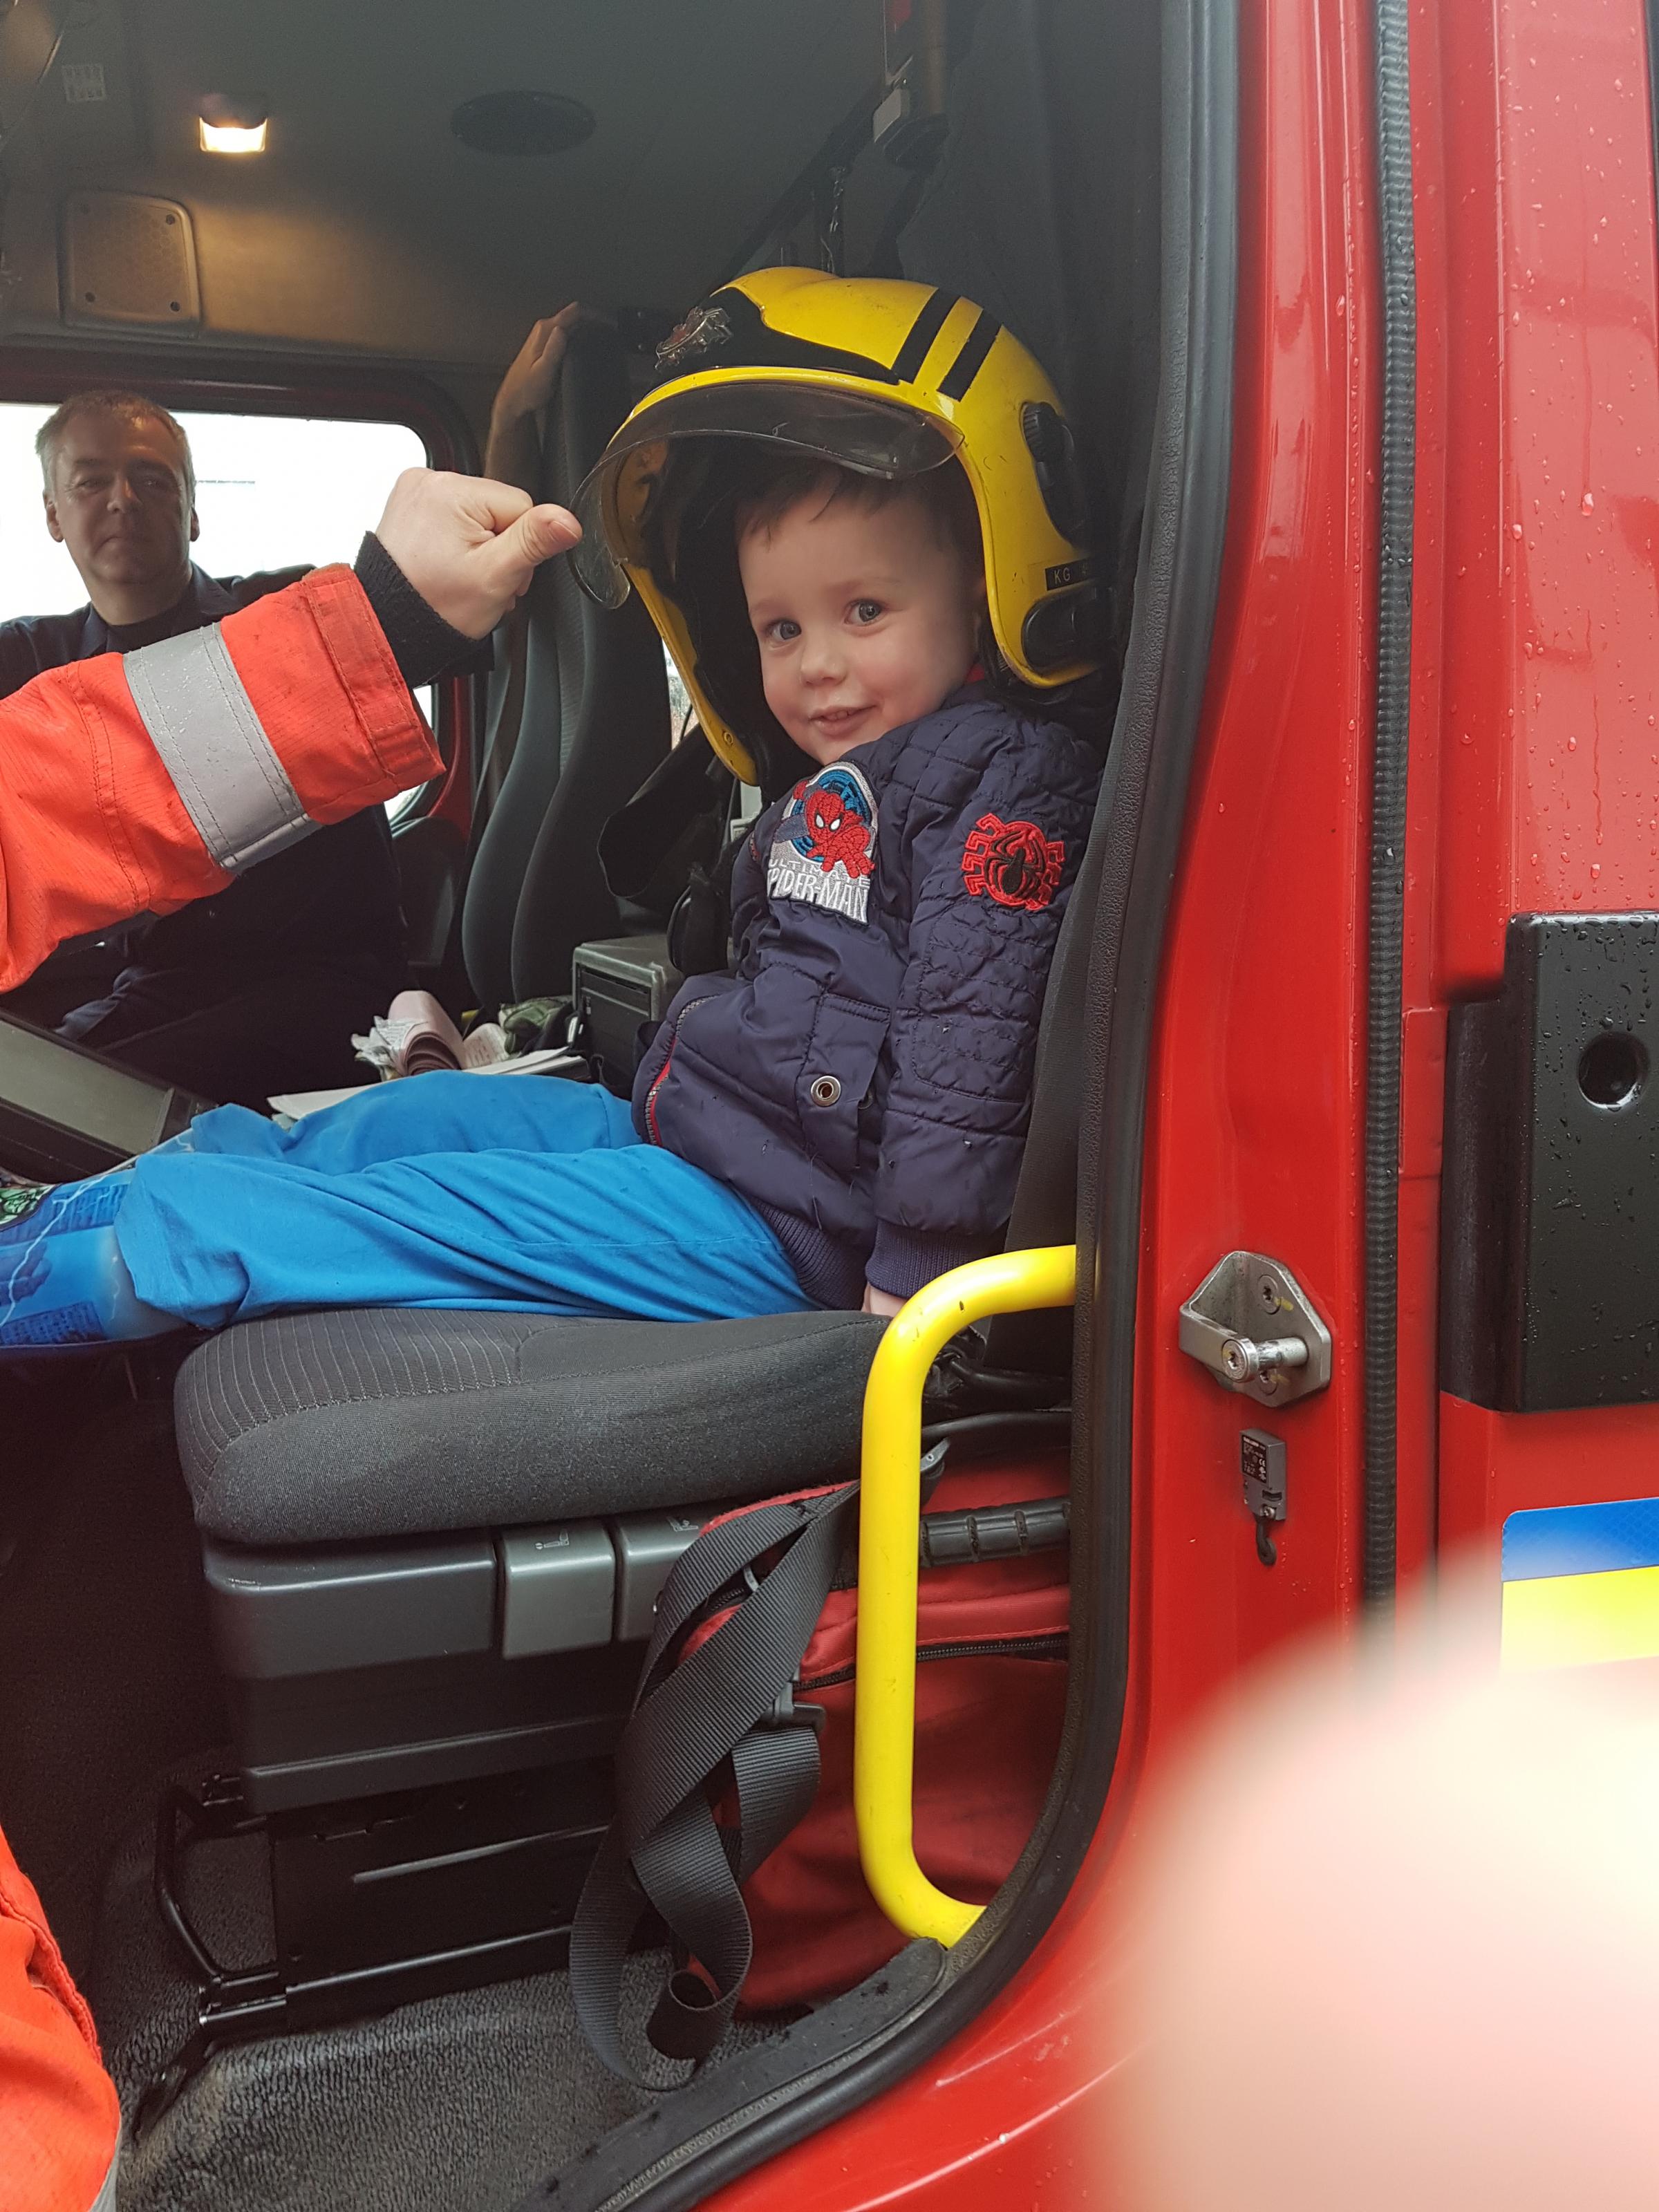 Bury toddler rescued from baby gate - Bury Times